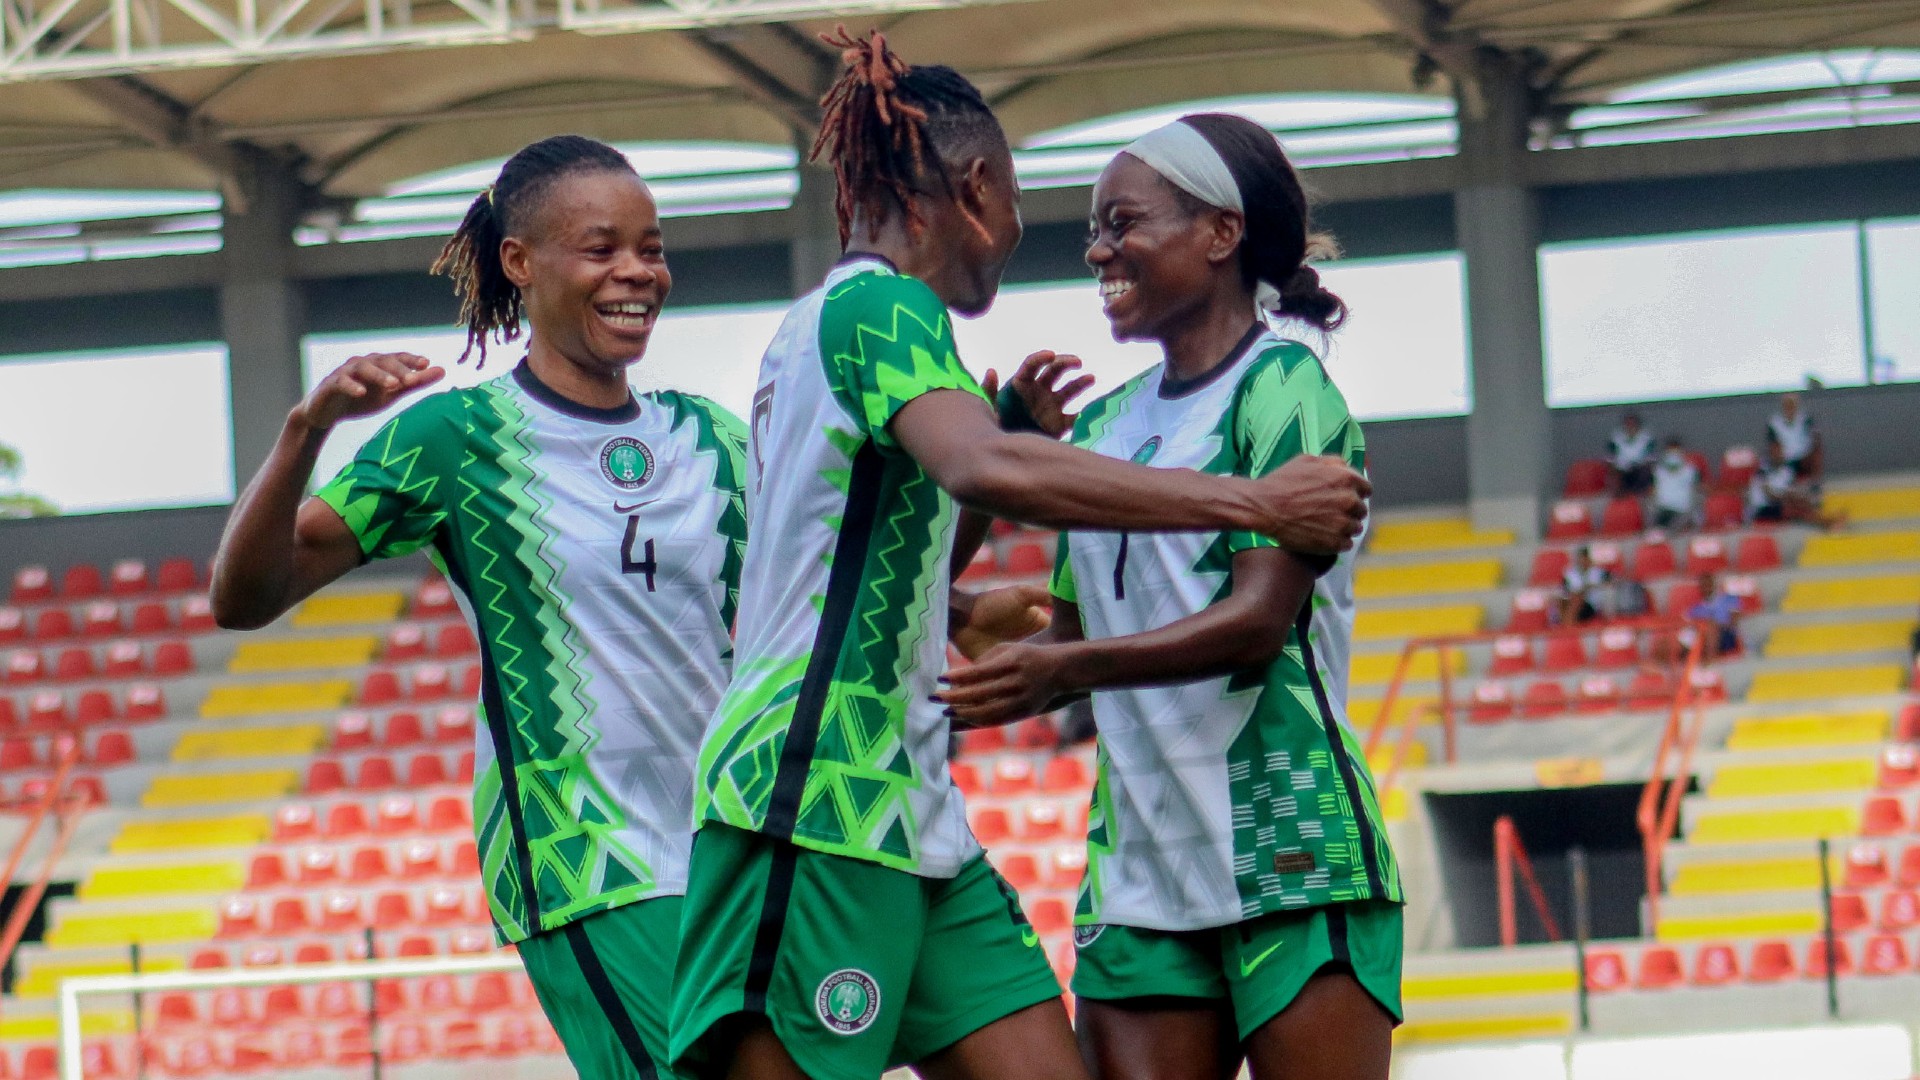 2022 Awcon Qualifiers: Nigeria 2-0 Ghana - Kanu's double earns Super Falcons comfortable win